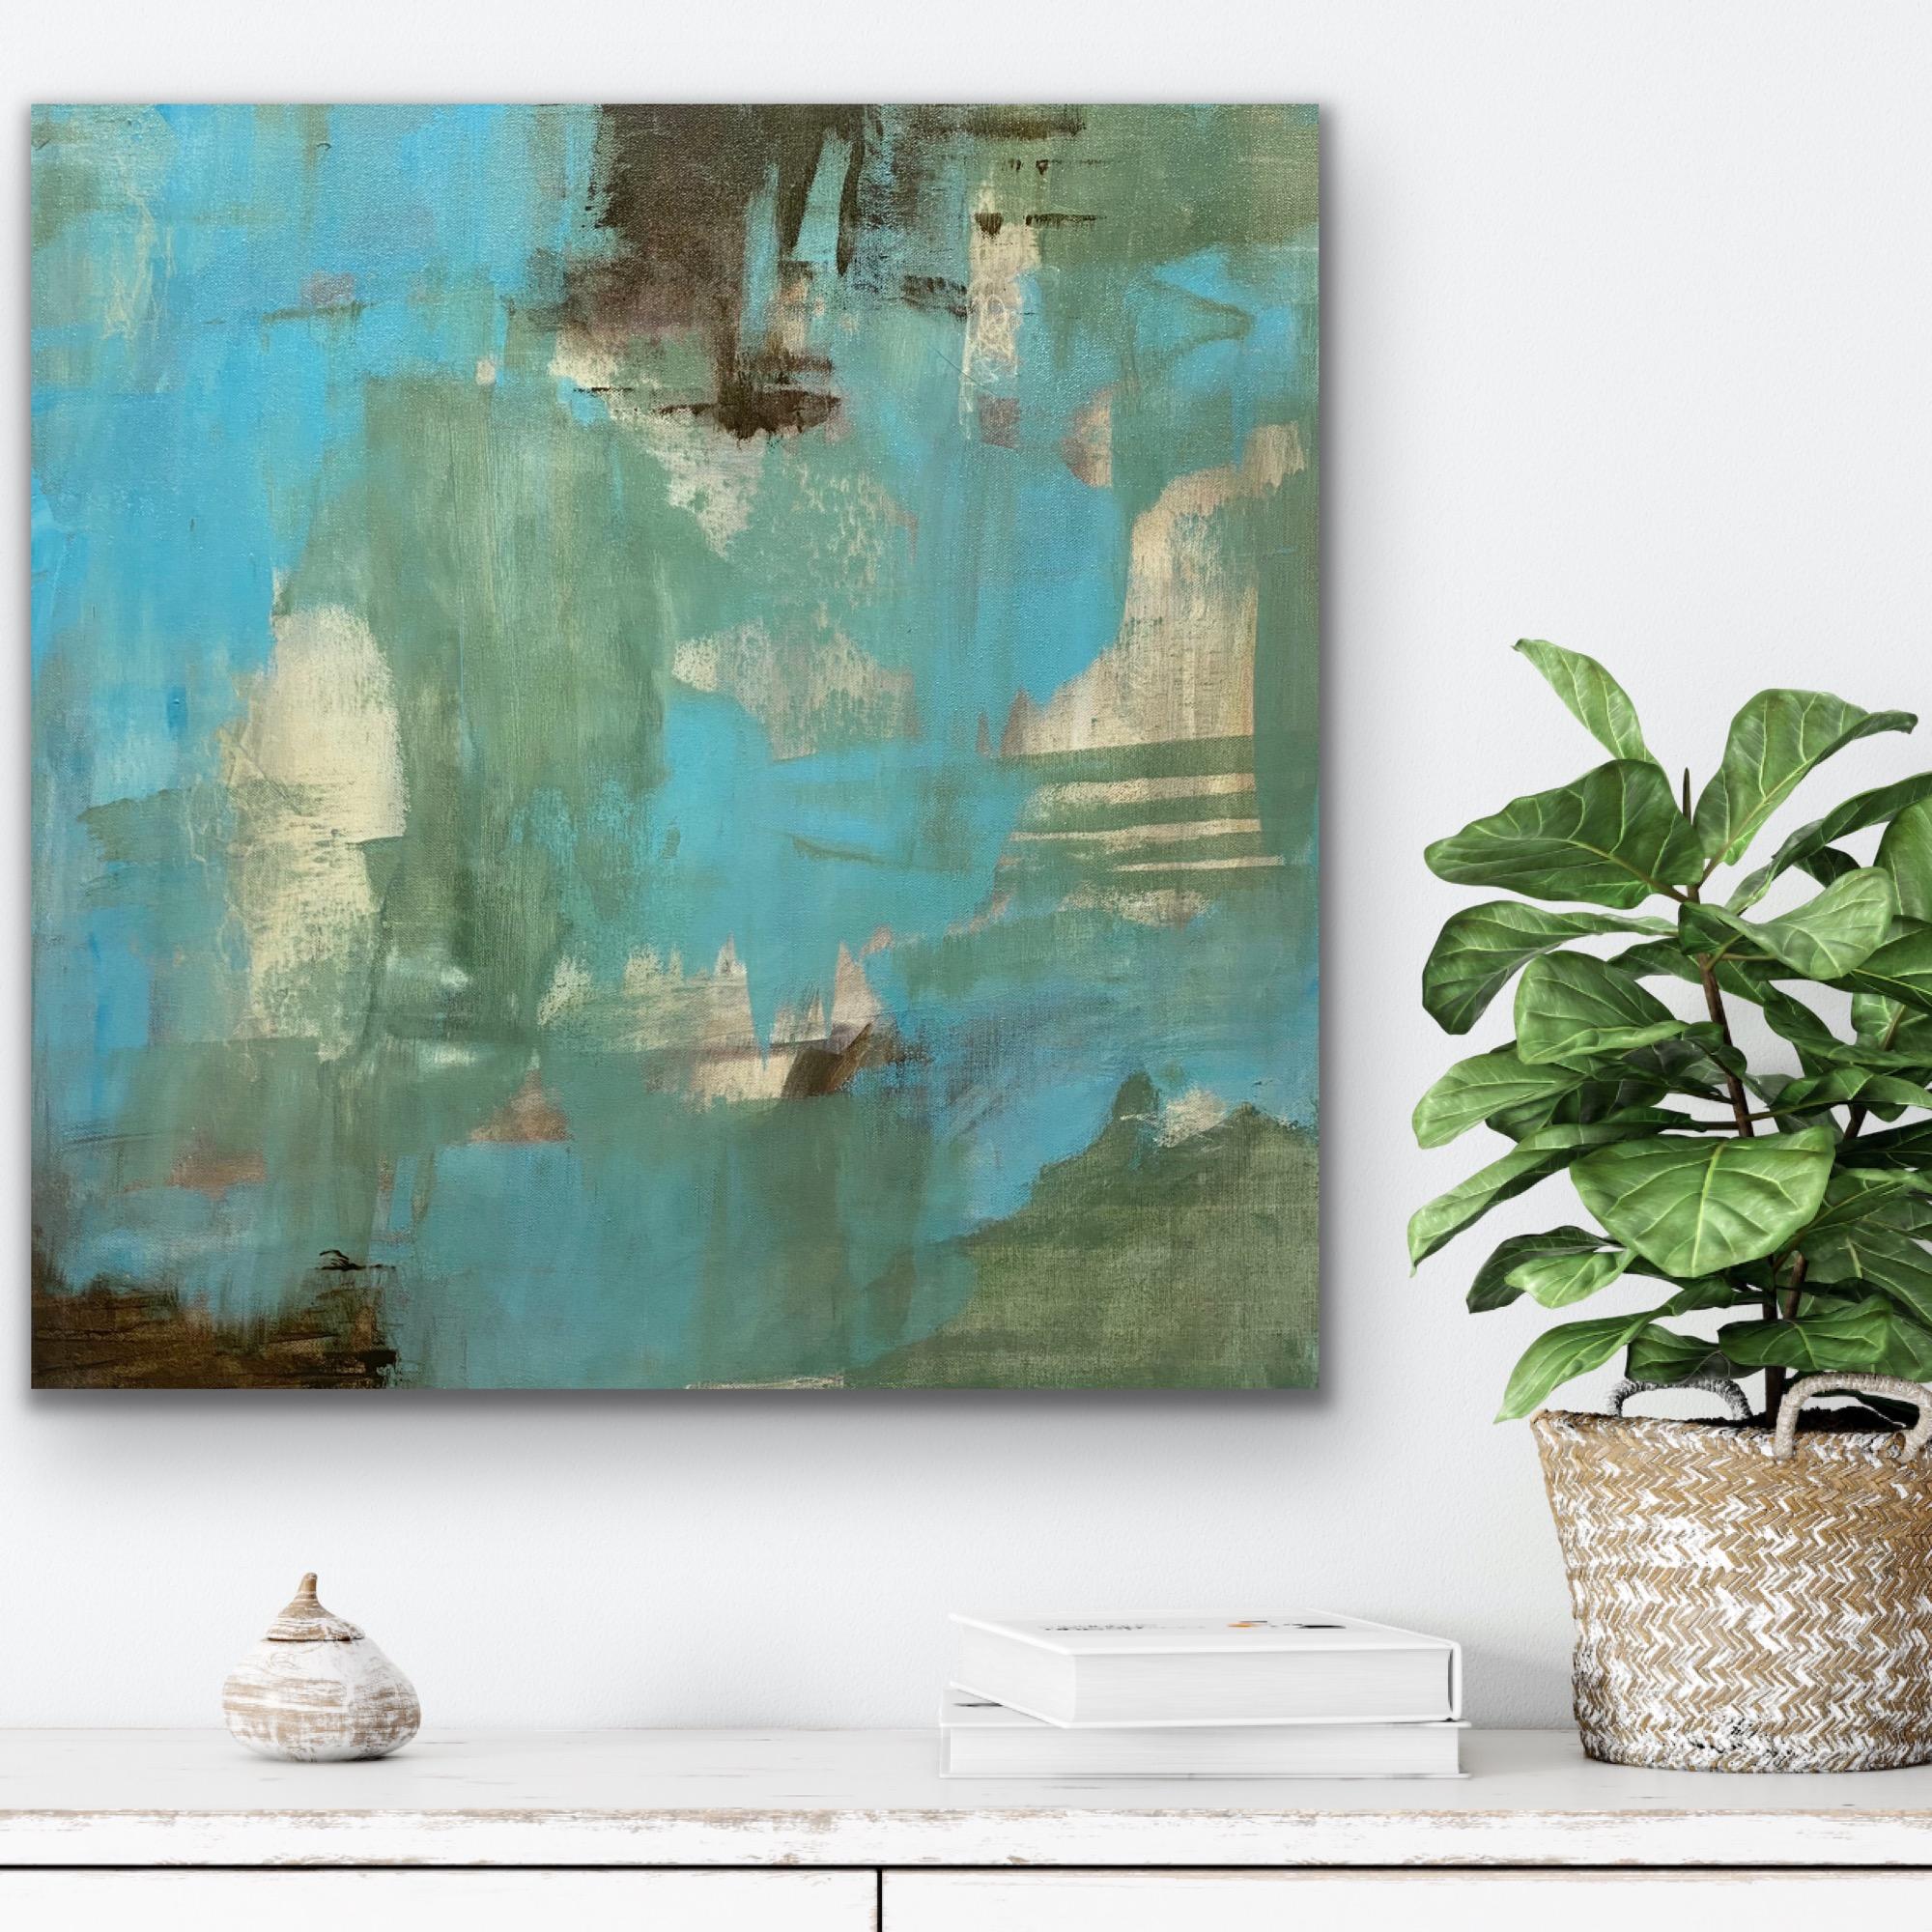 This contemporary abstract painting has a structure that is reminiscent of fencing, trees, barns and blue skies.  It creates a remarkable sense of home and comfort.